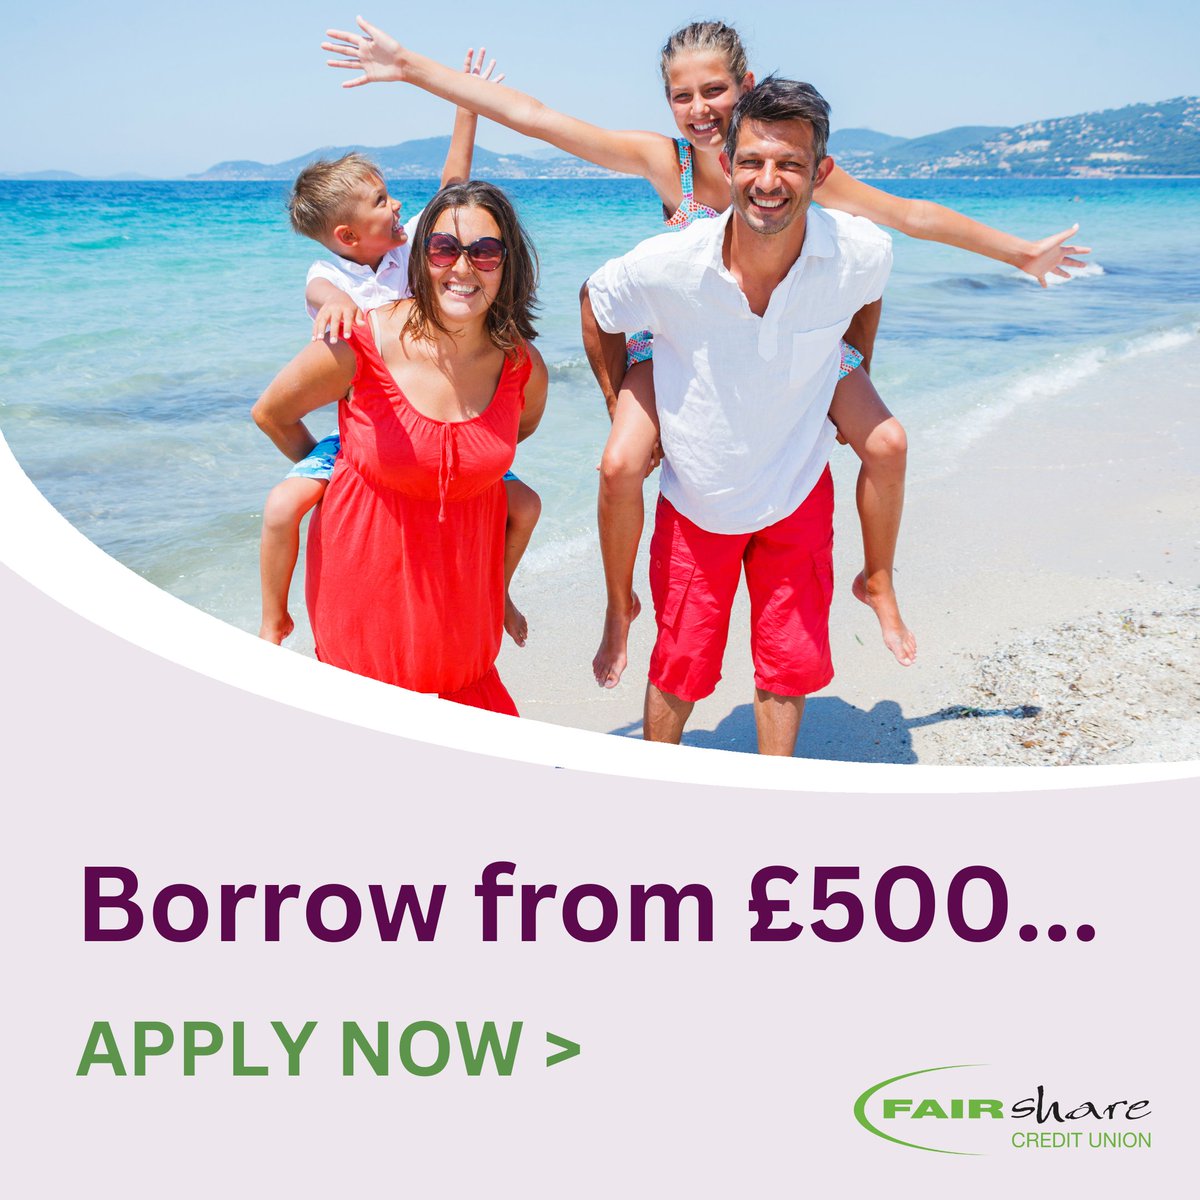 Summer Plans?🌞 Can FAIRshare help you with a Saver Loan from £500? 🌞We offer affordable loans + you Save as you Borrow... Apply 👇fairshare.uk.com/loans/fairshar… T& Cs apply #peoplebeforeprofit #communitybank #creditunion🌞